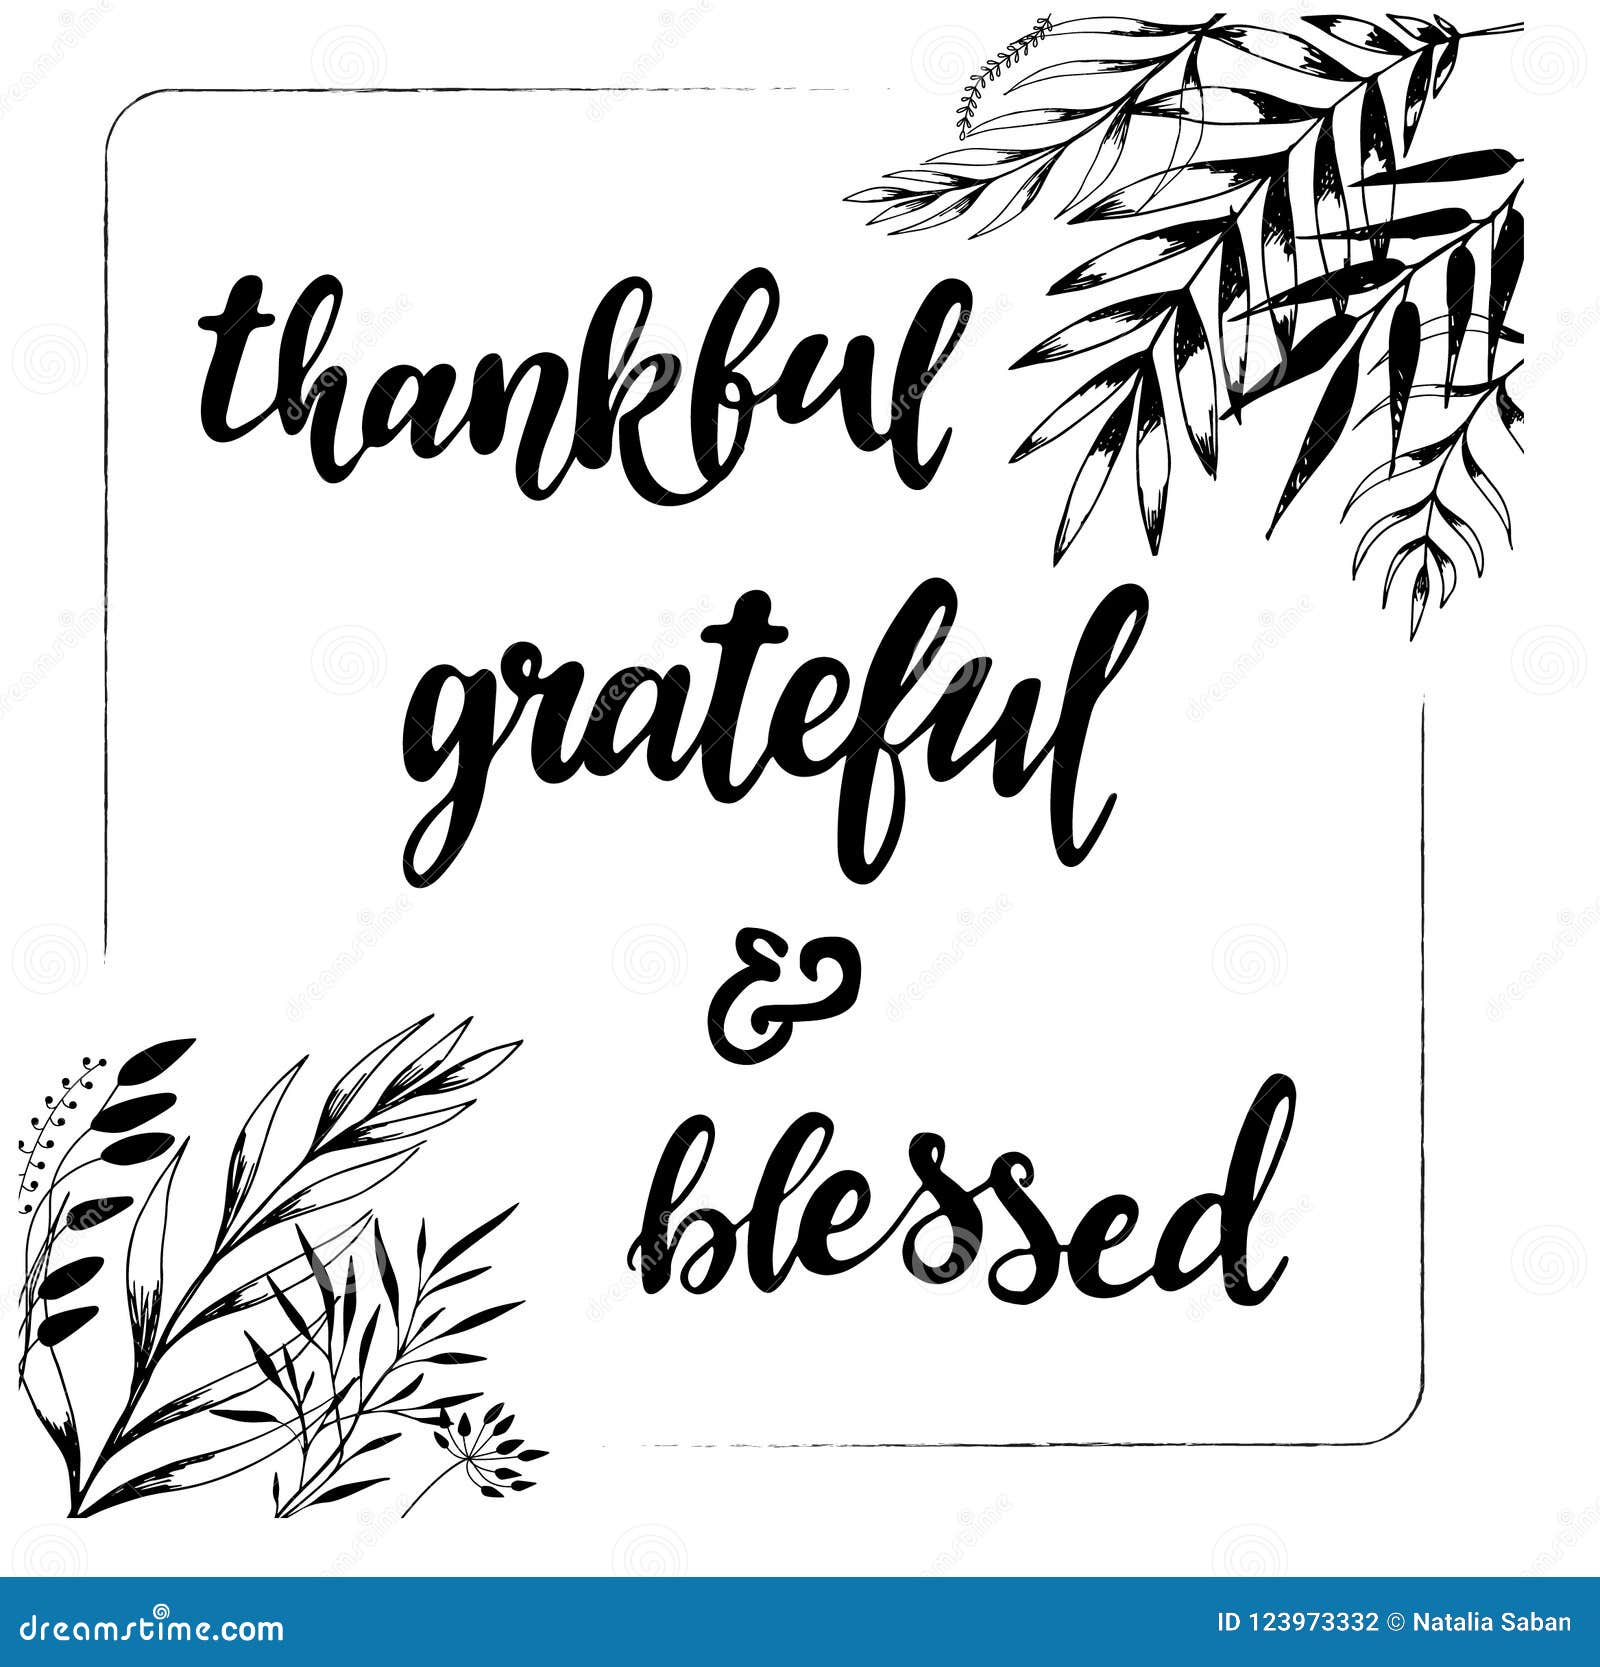 Download Thankful. Grateful. Blessed Hand Written Phrase Stock ...